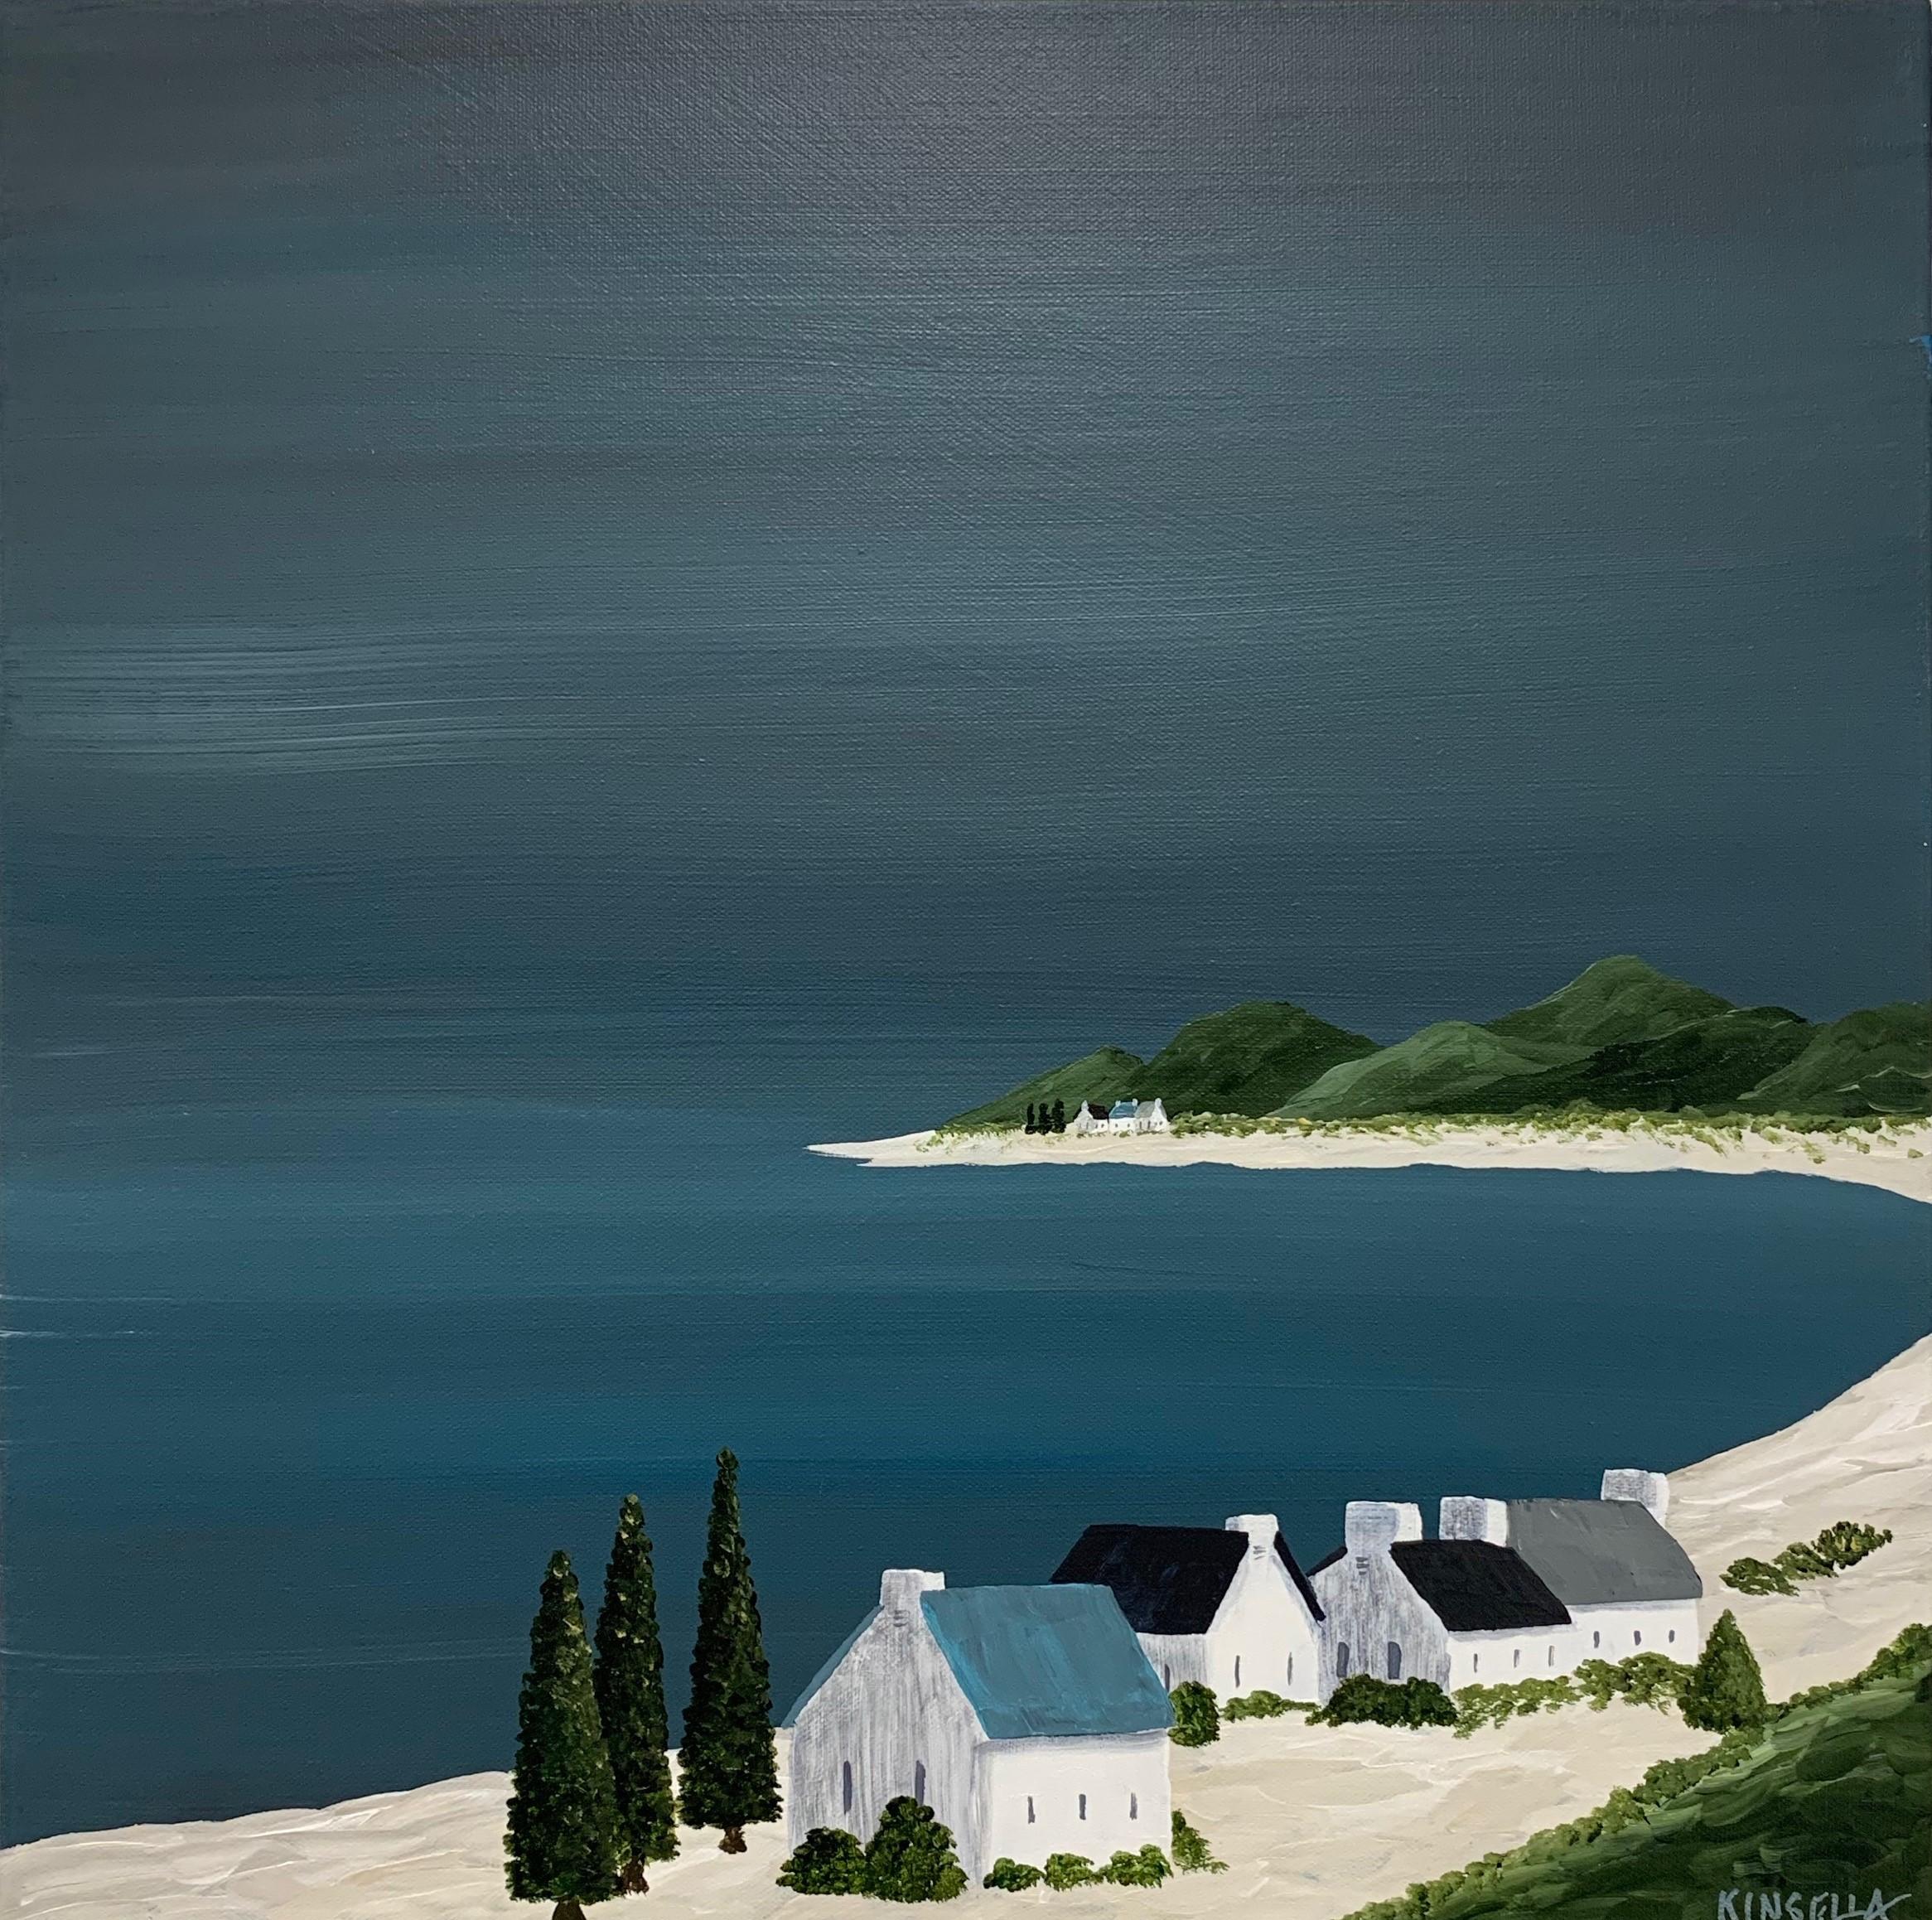 'Village of Joy' is a medium size contemporary acrylic on canvas coastal painting created by American artist Susan Kinsella in 2019. Featuring a cold palette made of blue, black, green and beige tones, the painting depicts a serene village set along